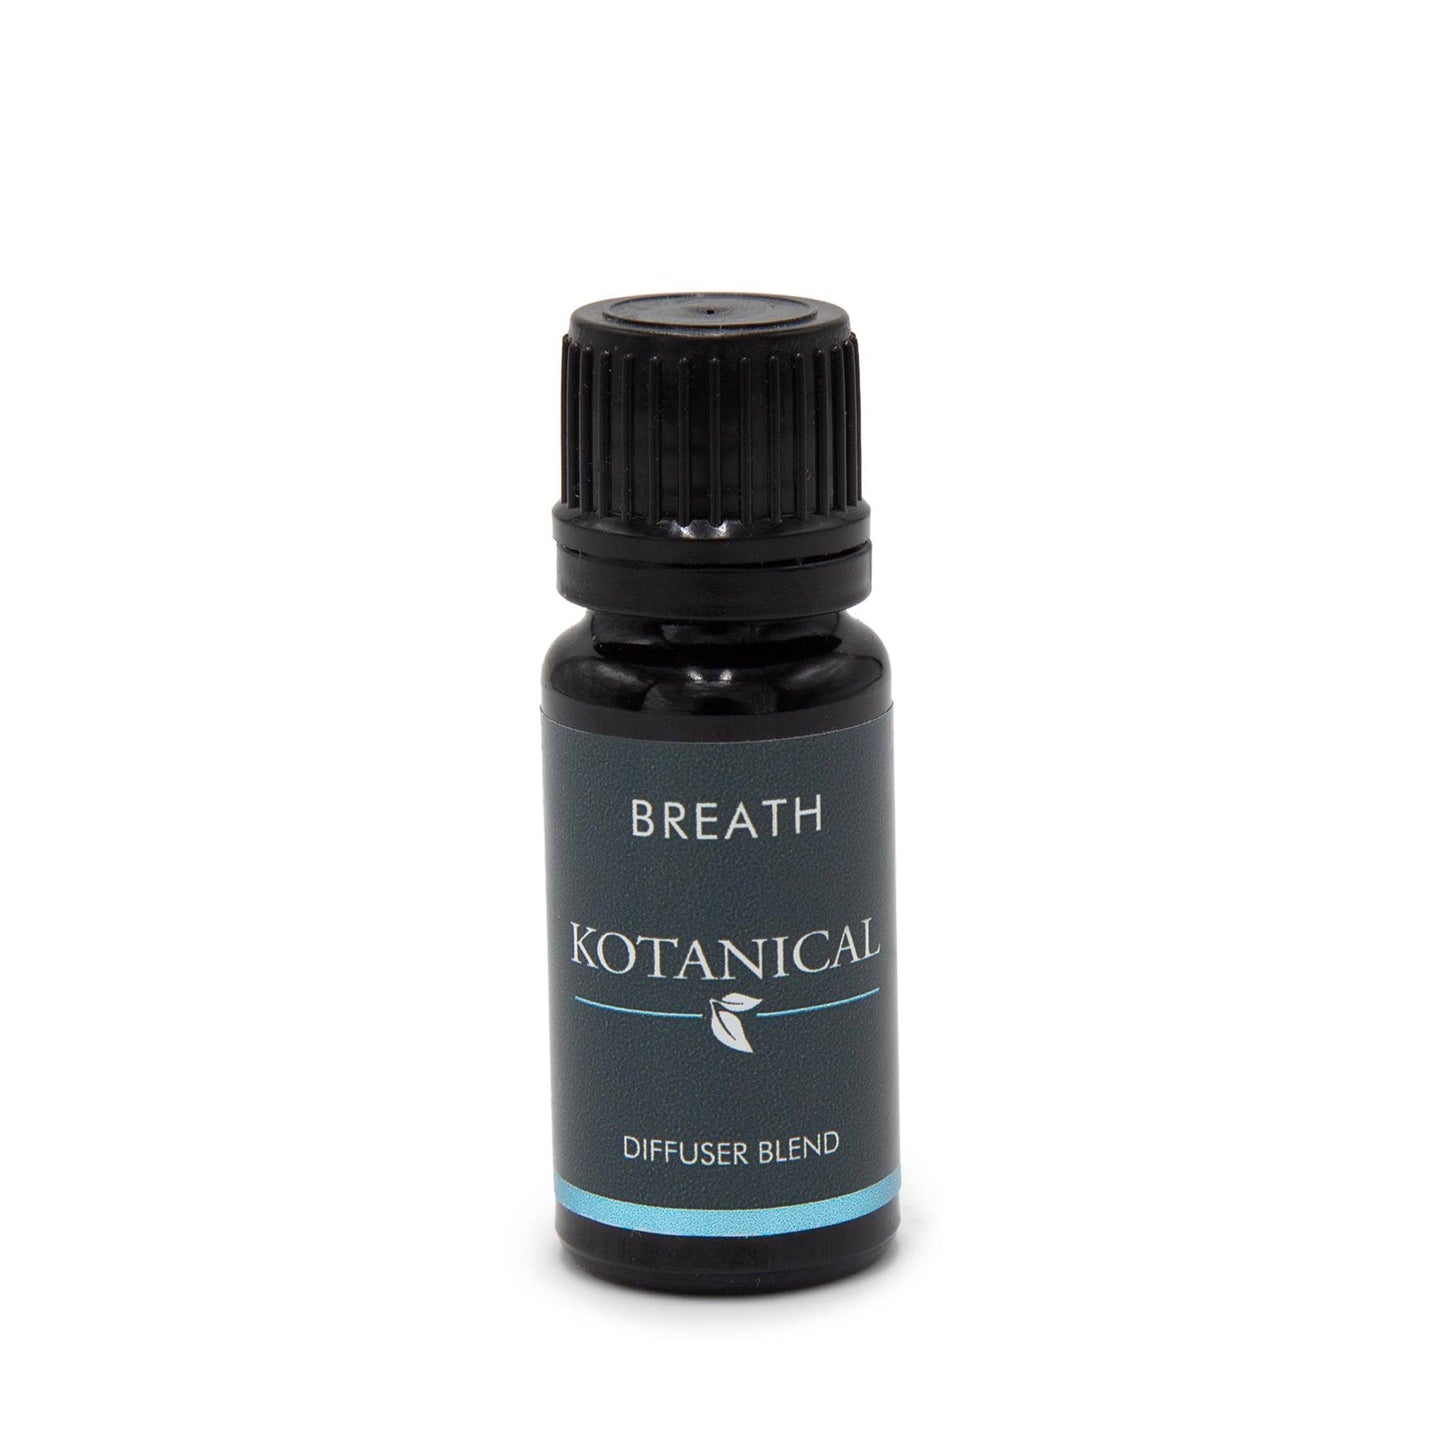 Load image into Gallery viewer, Kotanical Essential Oil Breath Essential Oil Diffuser Blend 10ml - Kotanical
